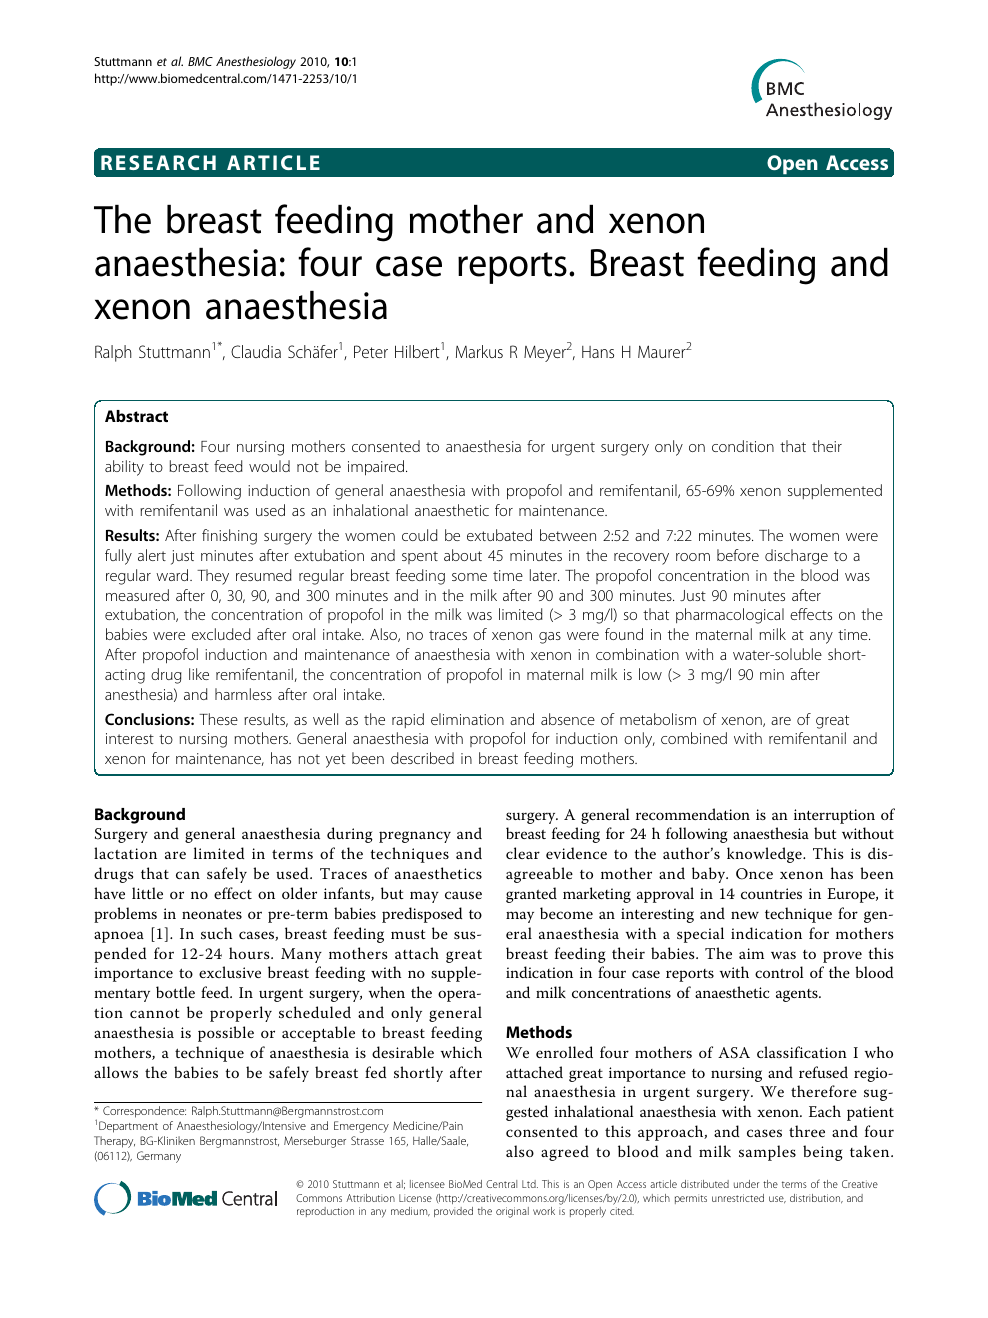 Untouched run out Foster parents The breast feeding mother and xenon anaesthesia: four case reports. Breast  feeding and xenon anaesthesia – topic of research paper in Veterinary  science. Download scholarly article PDF and read for free on